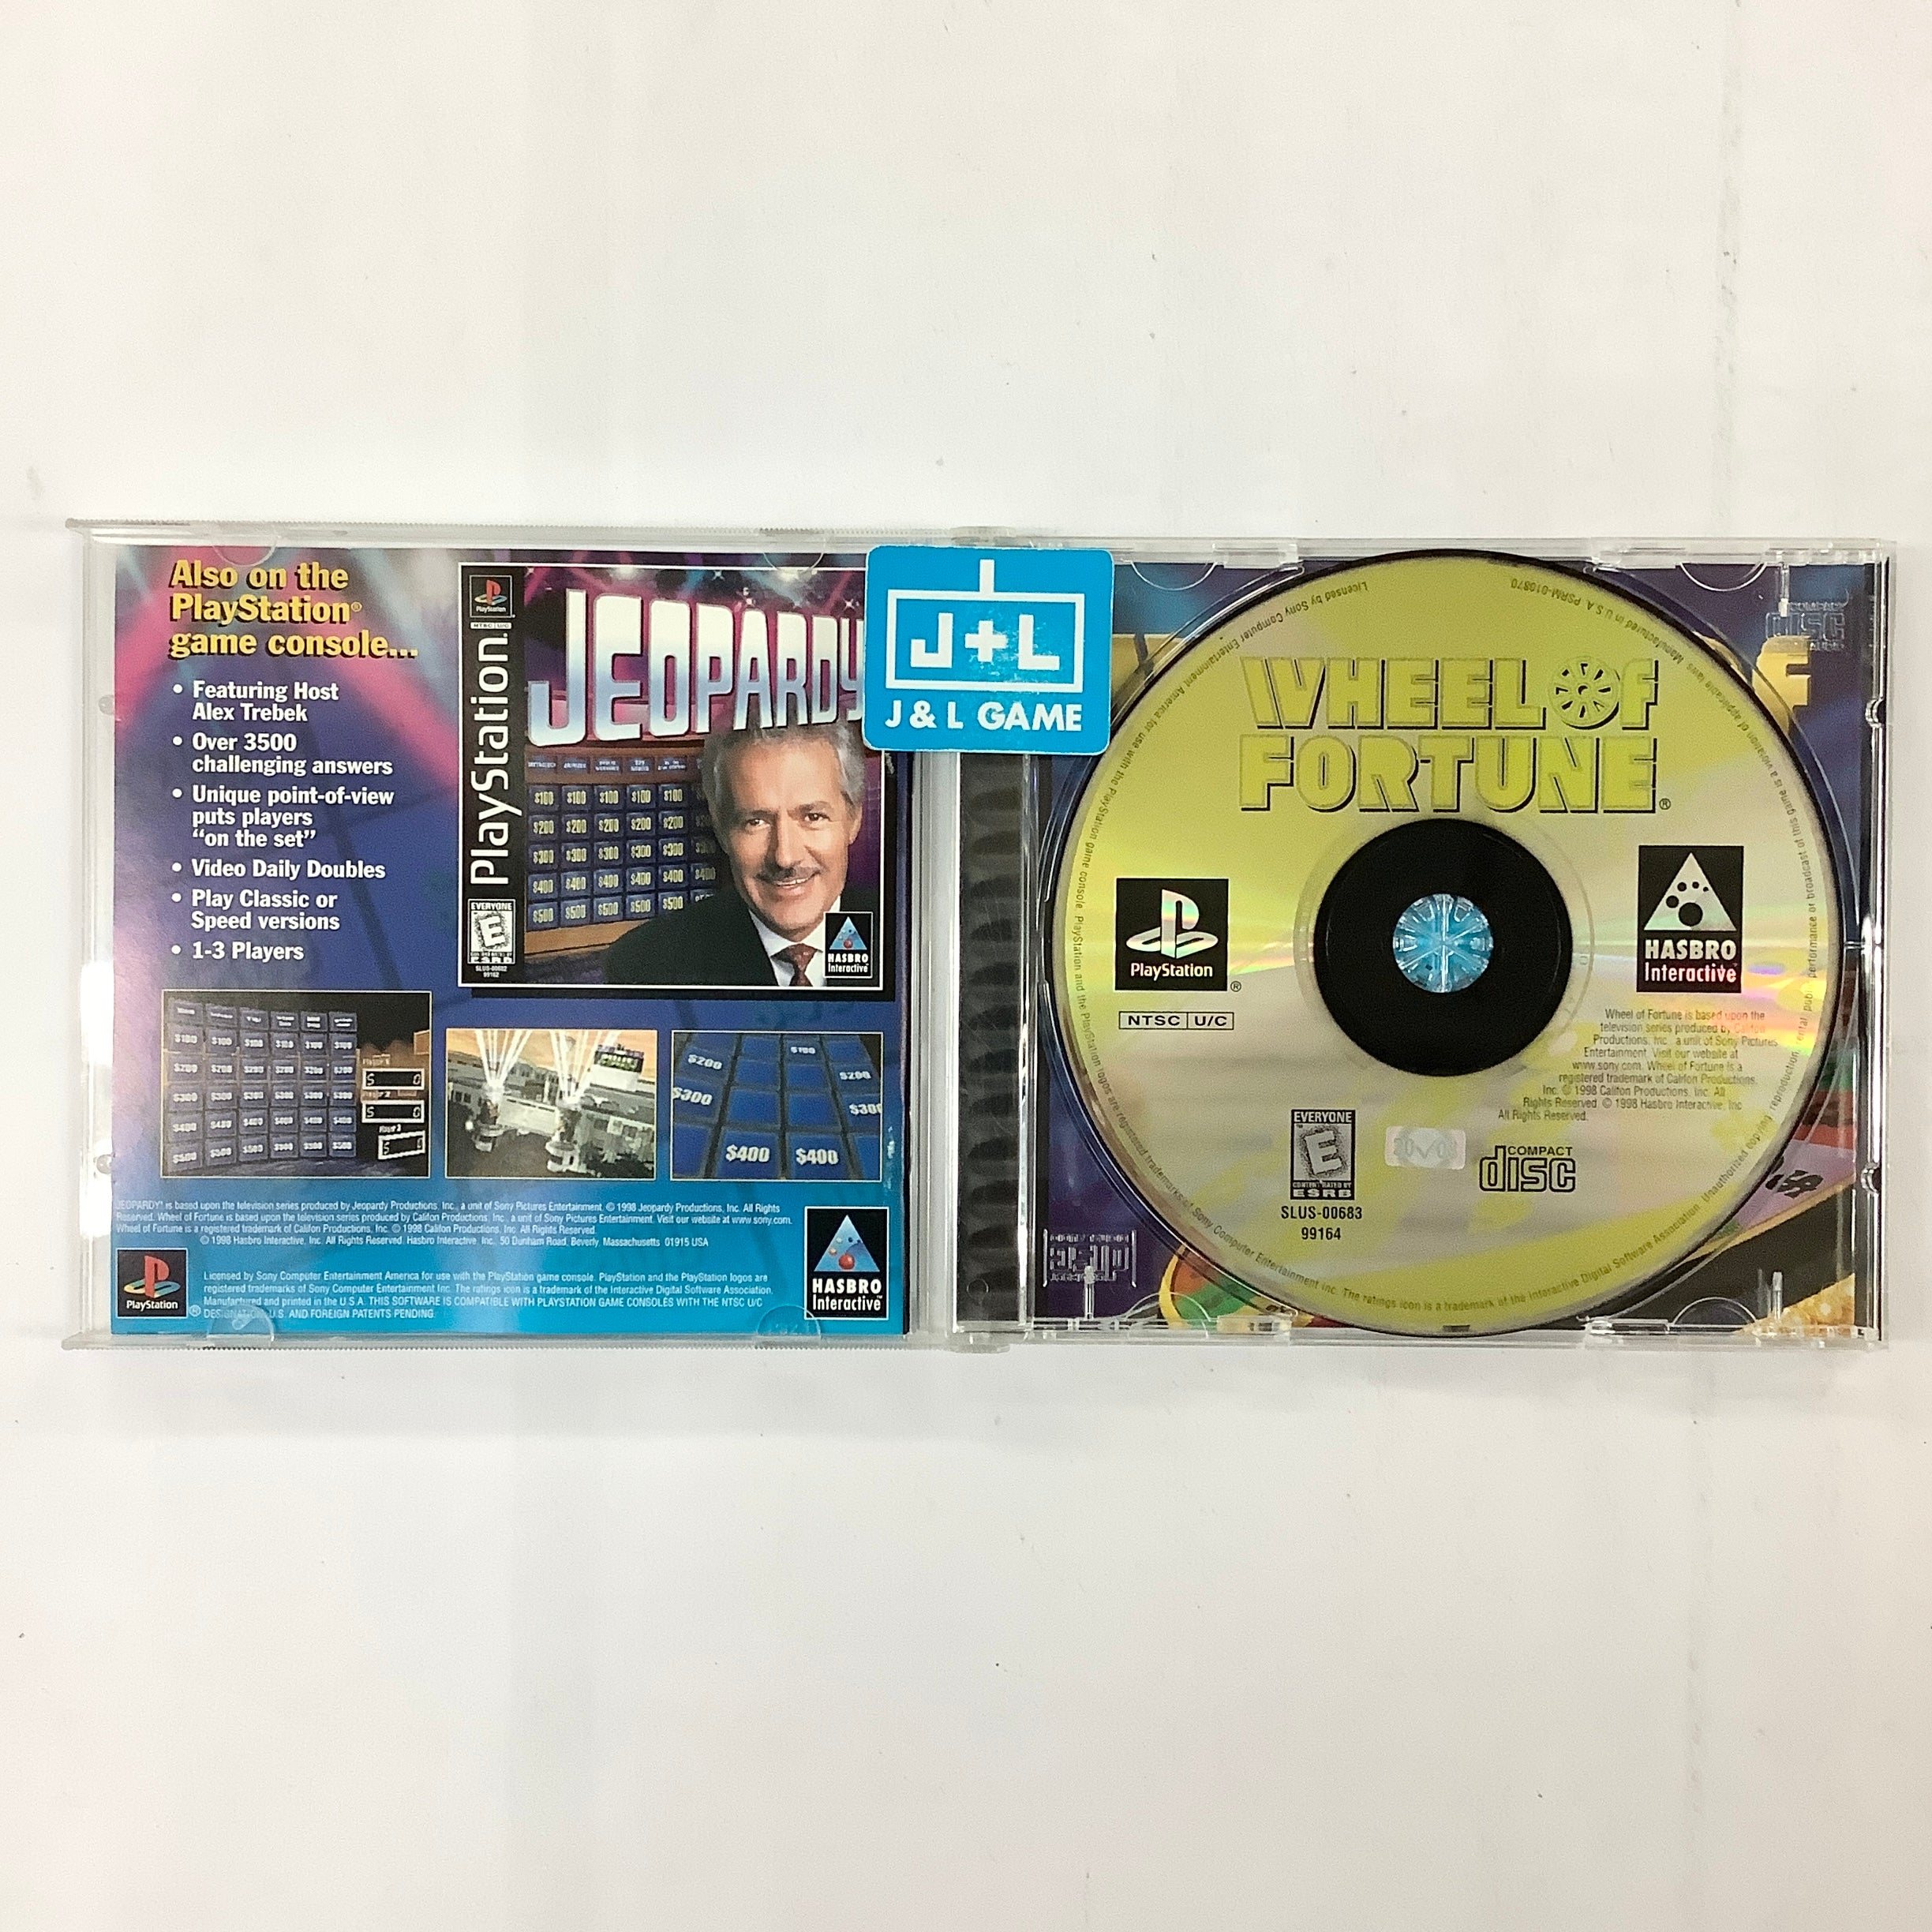 Wheel of Fortune - (PS1) PlayStation 1 [Pre-Owned] Video Games Hasbro Interactive   